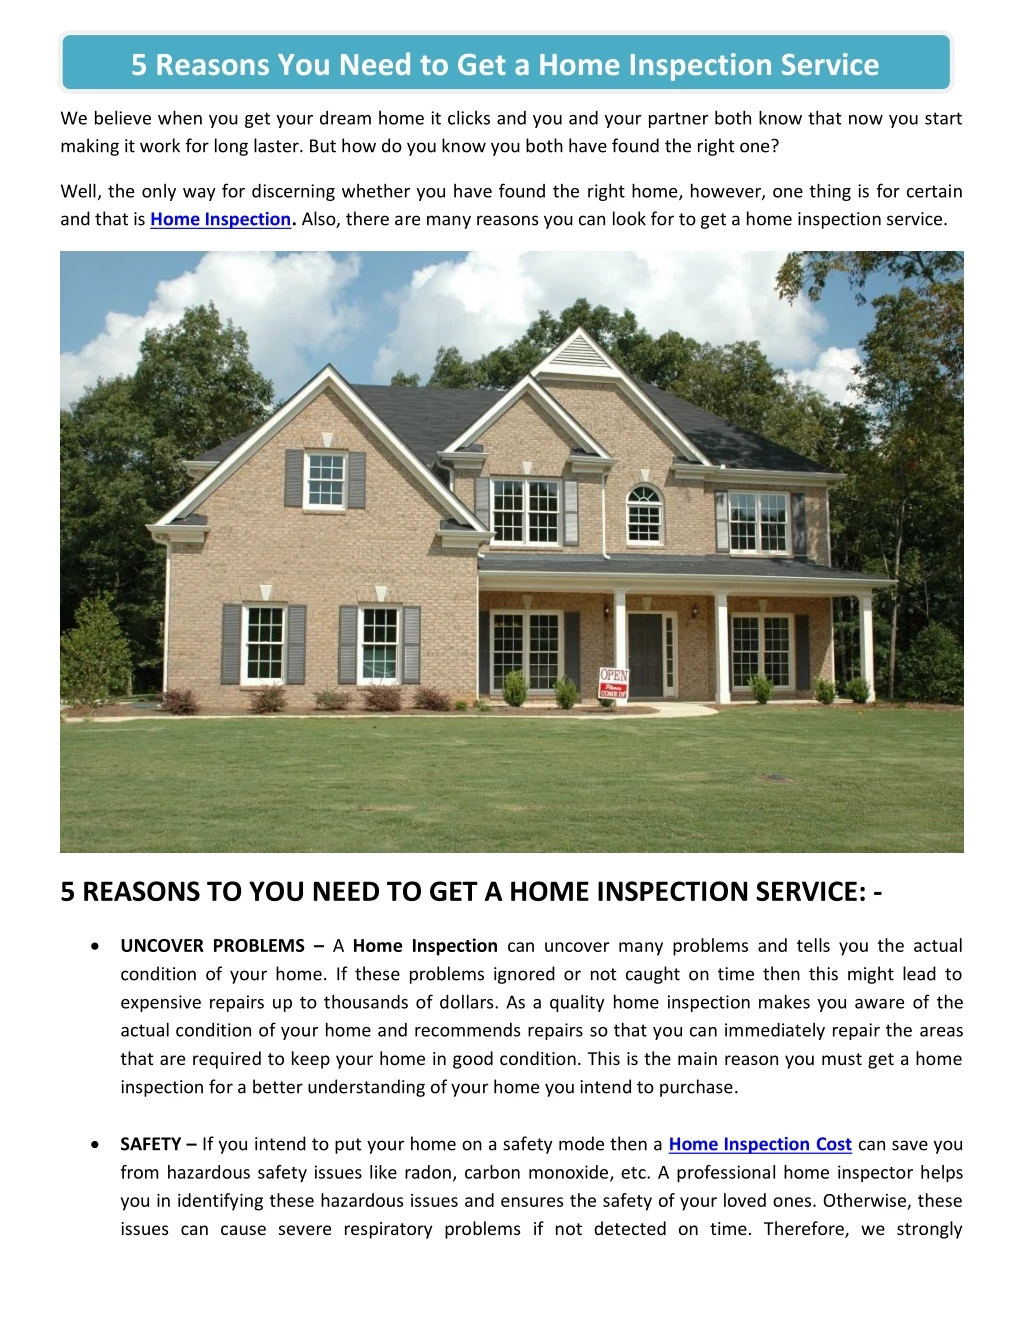 5 reasons you need to get a home inspection